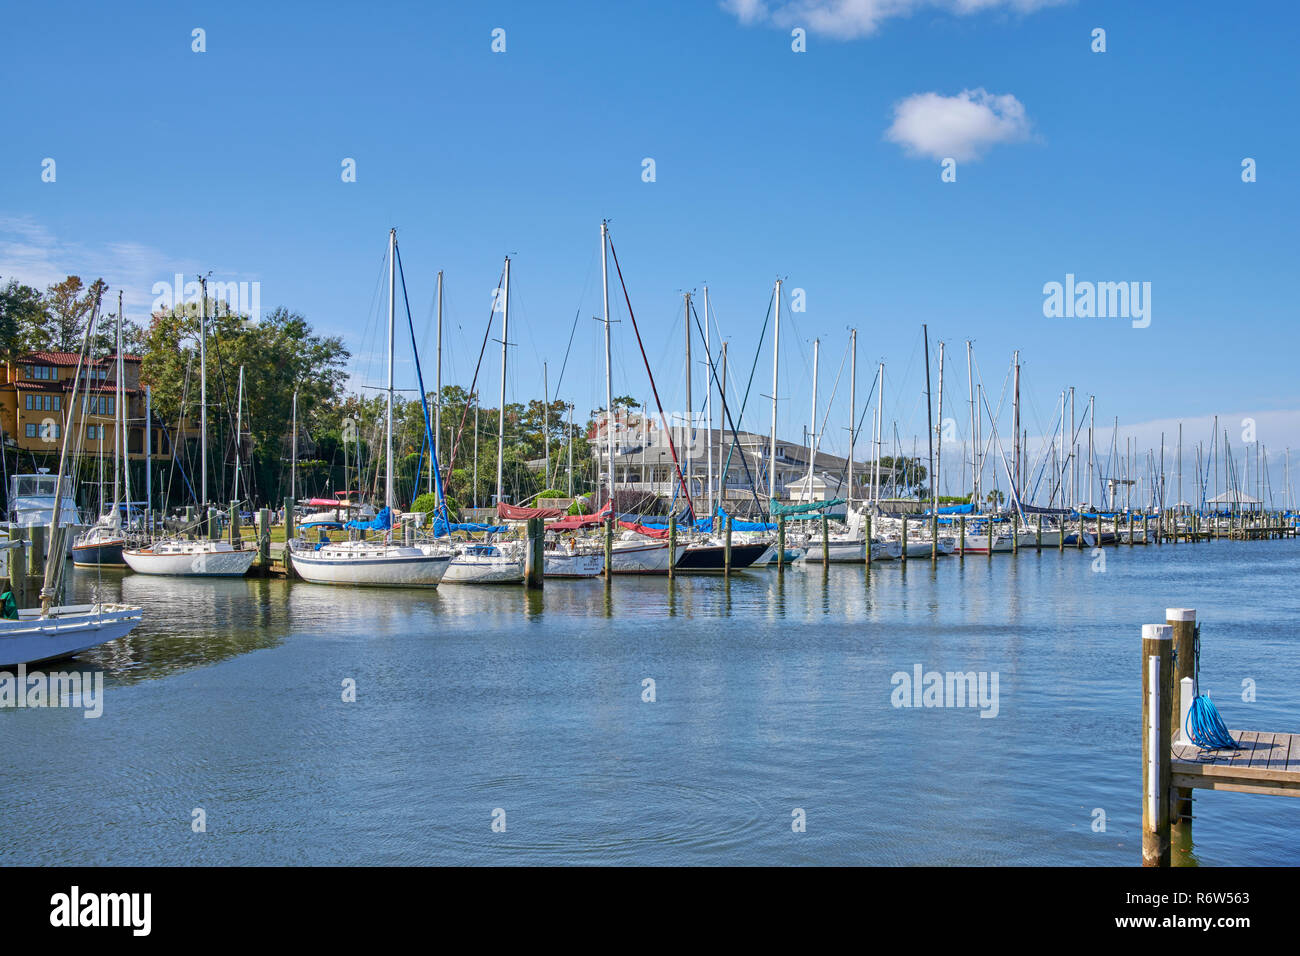 Sailboats tied up and lined up in boat slips at Fly Creek Marina on Mobile Bay, in Fairhope Alabama, USA. Stock Photo